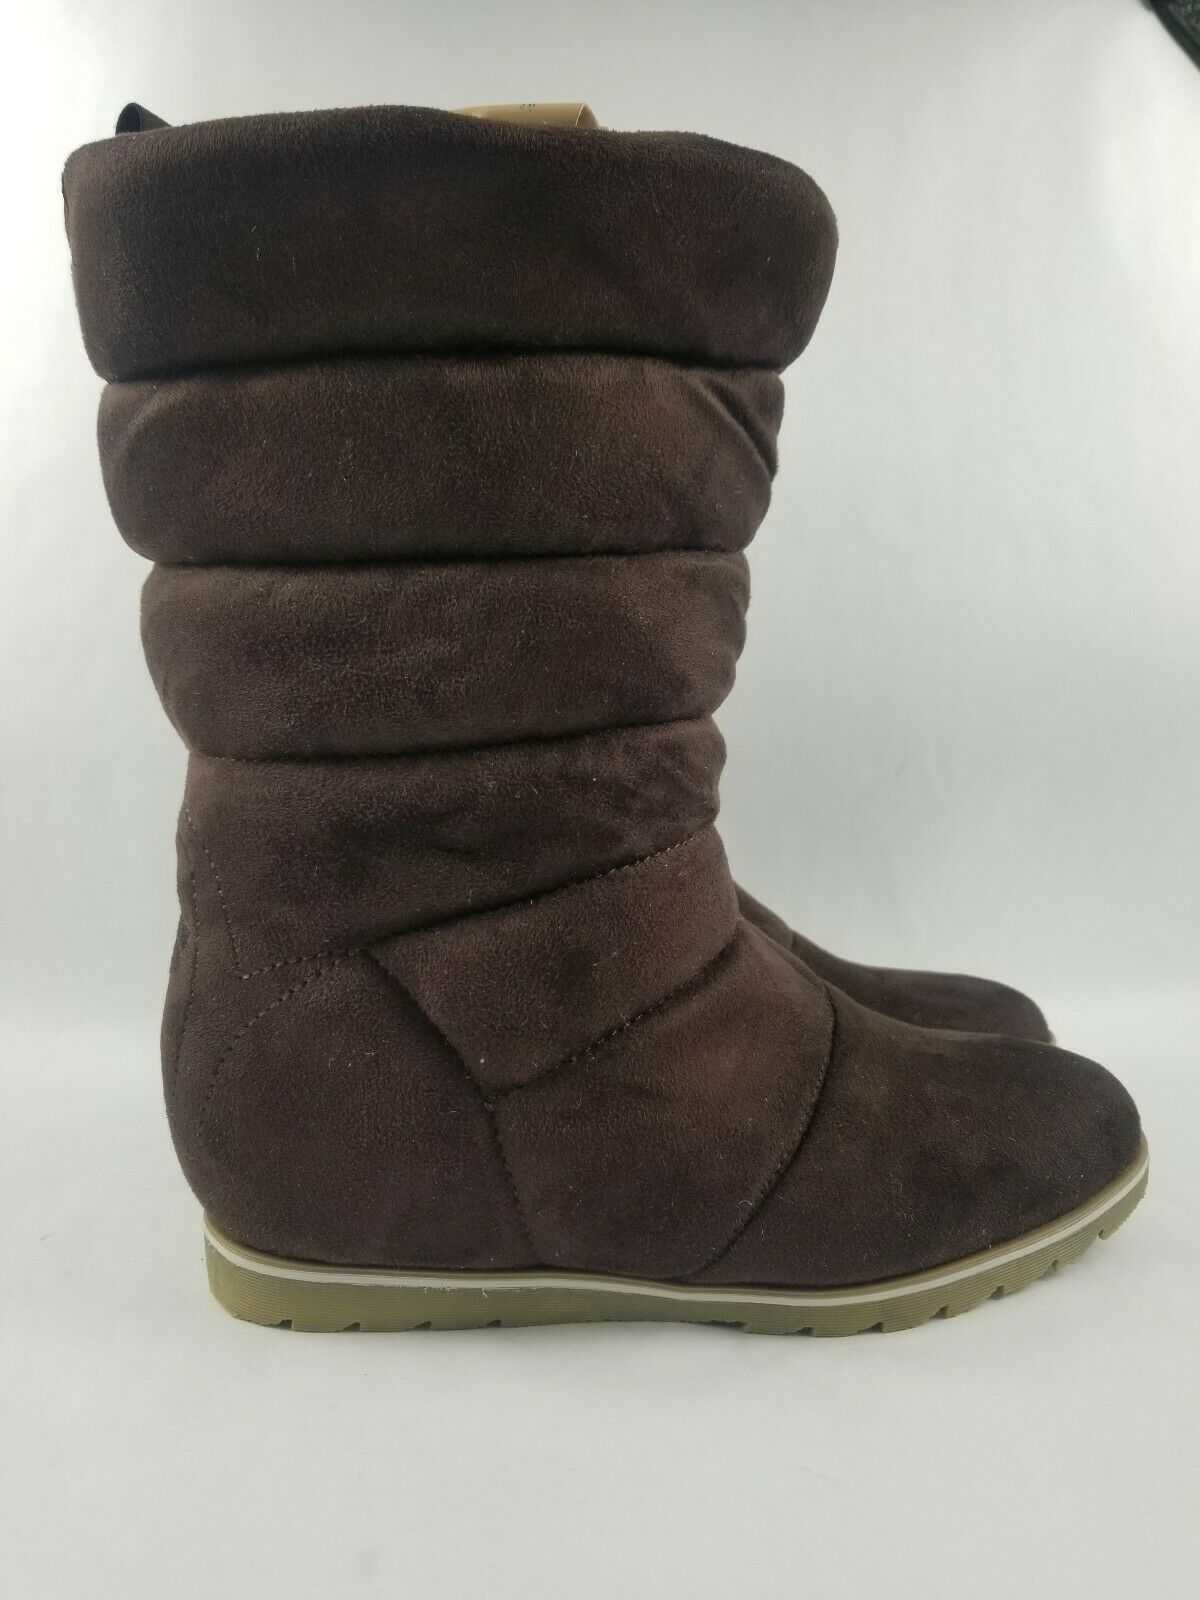 Nana Collection Shoes Women's Faux-fur Lined Mid-Calf Winter Boots